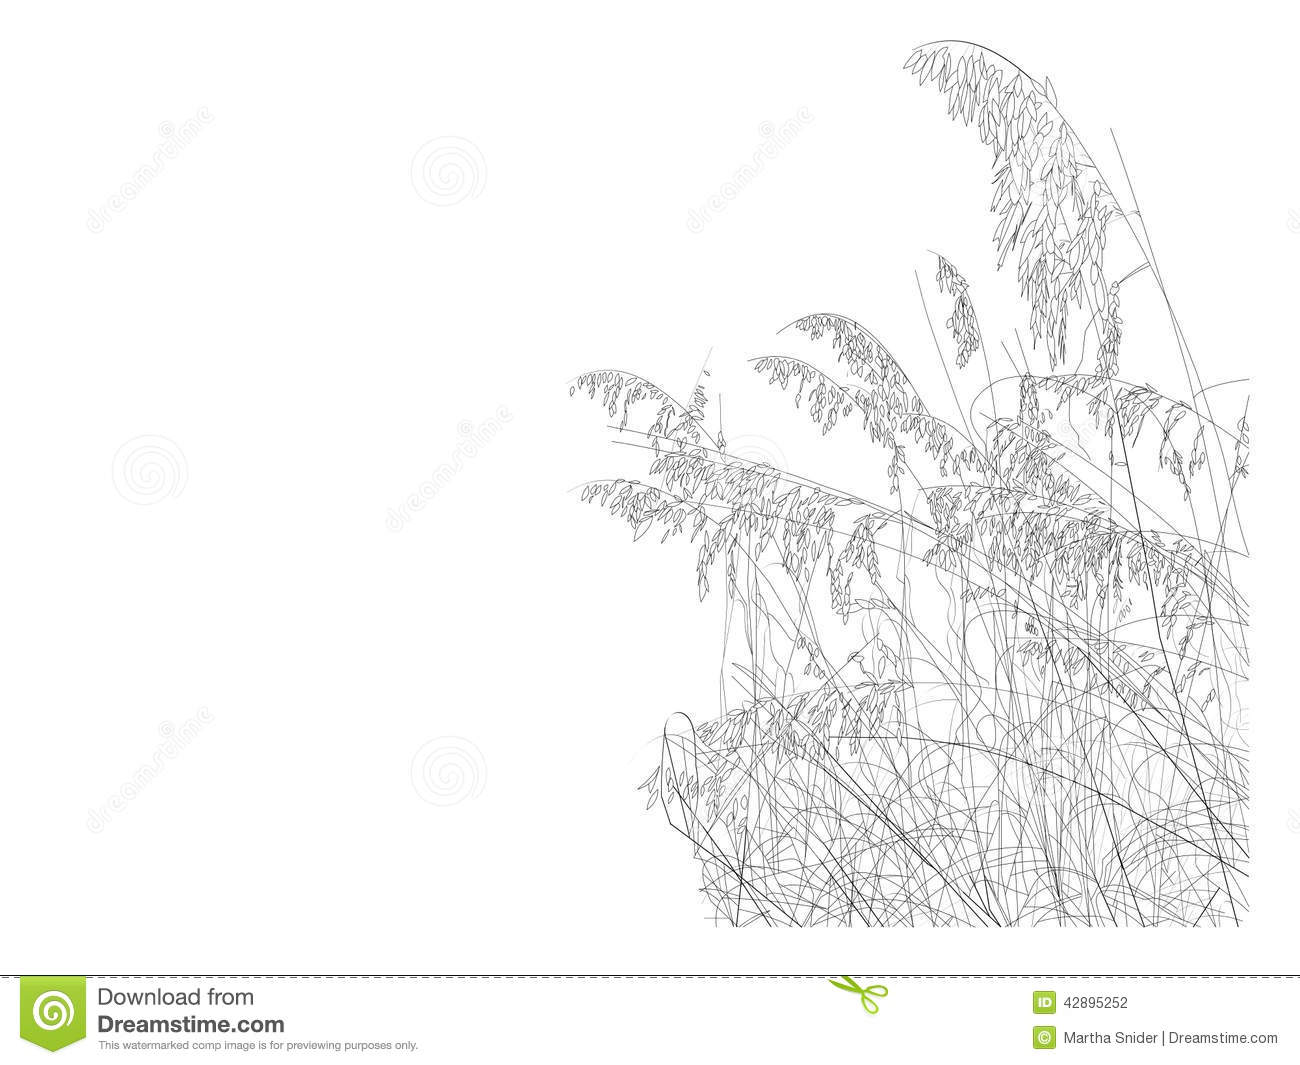 Line Drawing Of Sea Oats On The Beach Mr No Pr No 2 254 1